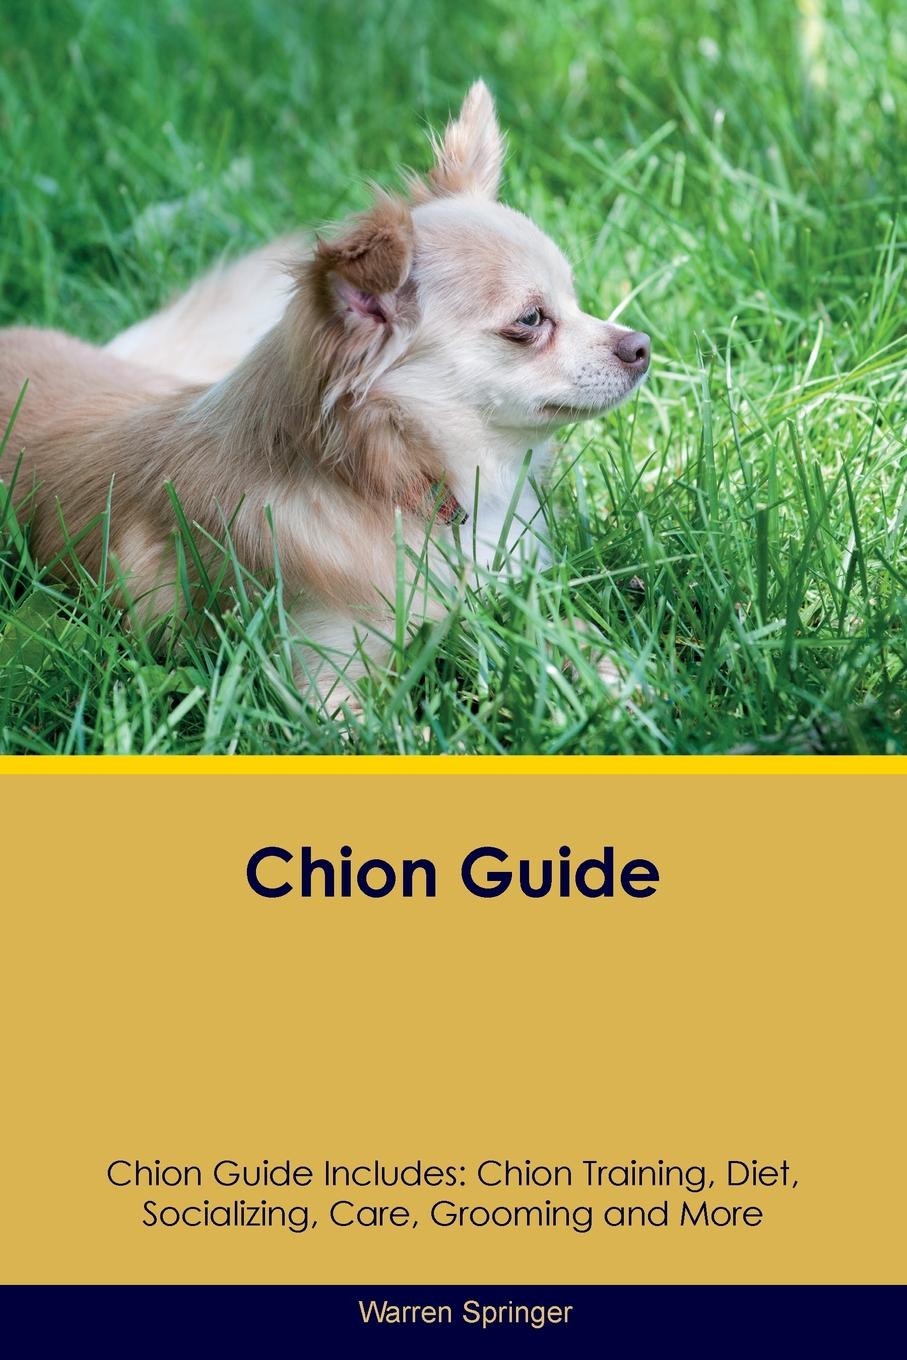 Chion Guide Chion Guide Includes. Chion Training, Diet, Socializing, Care, Grooming, Breeding and More